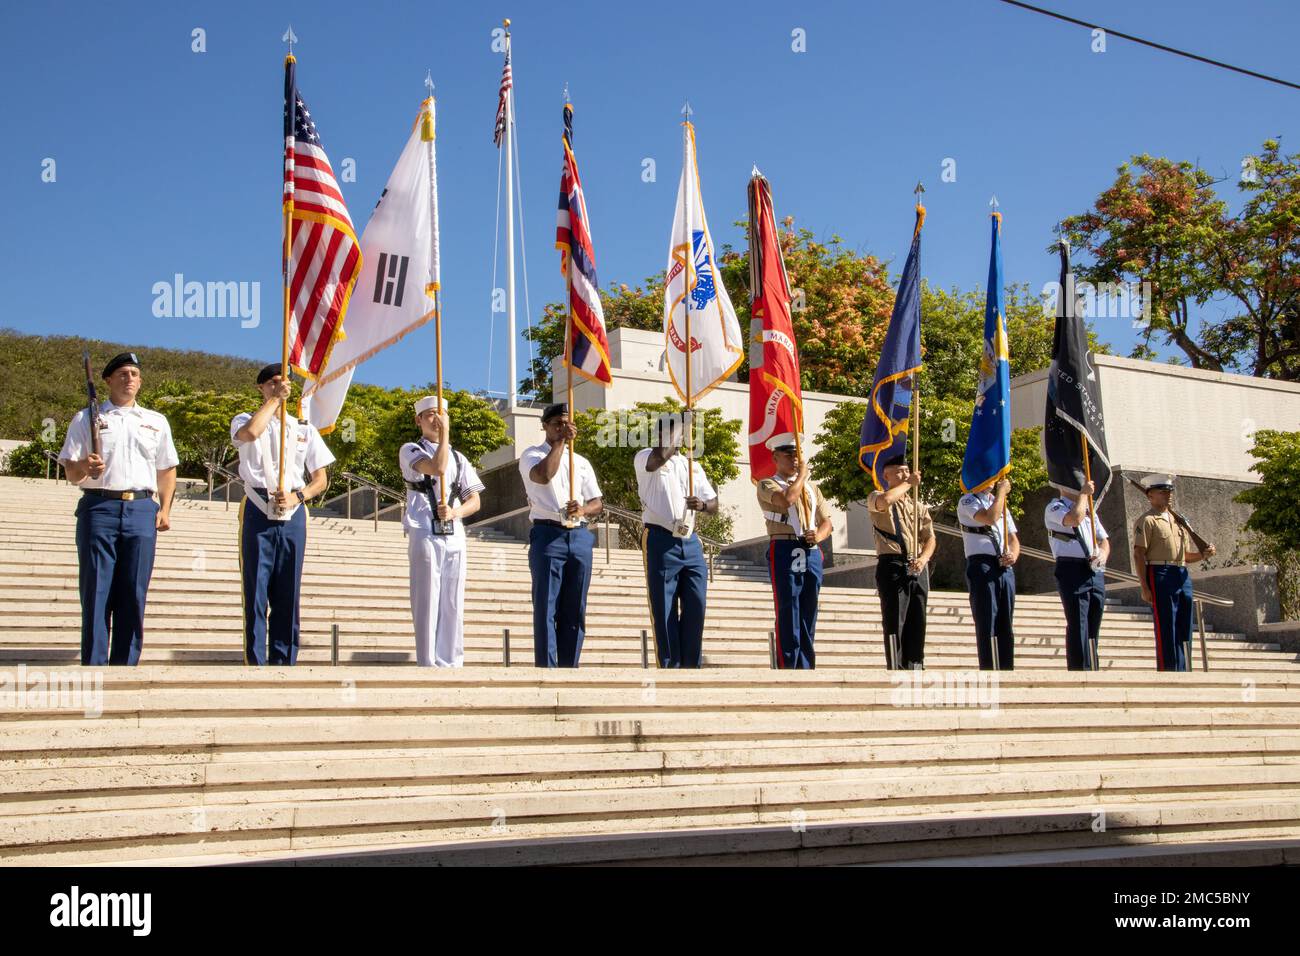 The U.S. Indo-Pacific Command Joint Service Color Guard presents the colors during the National Memorial Cemetery of the Pacific (Punchbowl) in Honolulu, Hawaii, June 25, 2022. The Korean War began on June 25, 1950, when North Korean armed forces invaded South Korea. The attack took place at several strategic points along the 38th parallel, the line dividing the communist Democratic People’s Republic of Korea from the Republic of Korea in the south. This event honors the lives lost and the sacrifices made during the war. Stock Photo